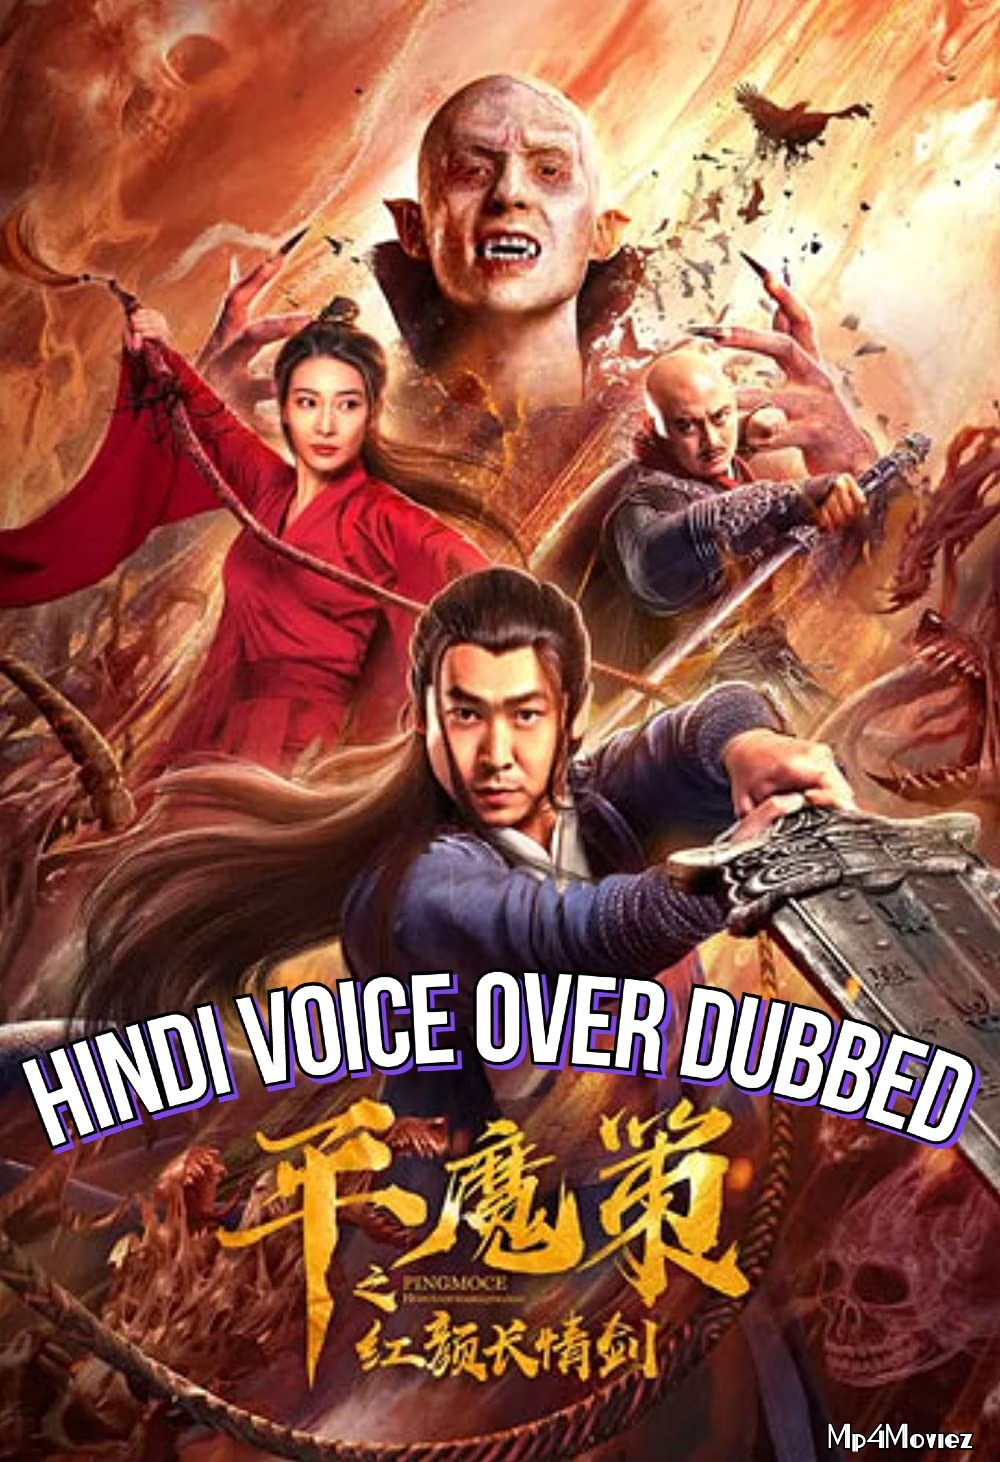 Ping Mo Ce: The Red Sword of Eternal Love (2021) Hindi (Voice Over) Dubbed WEBRip download full movie